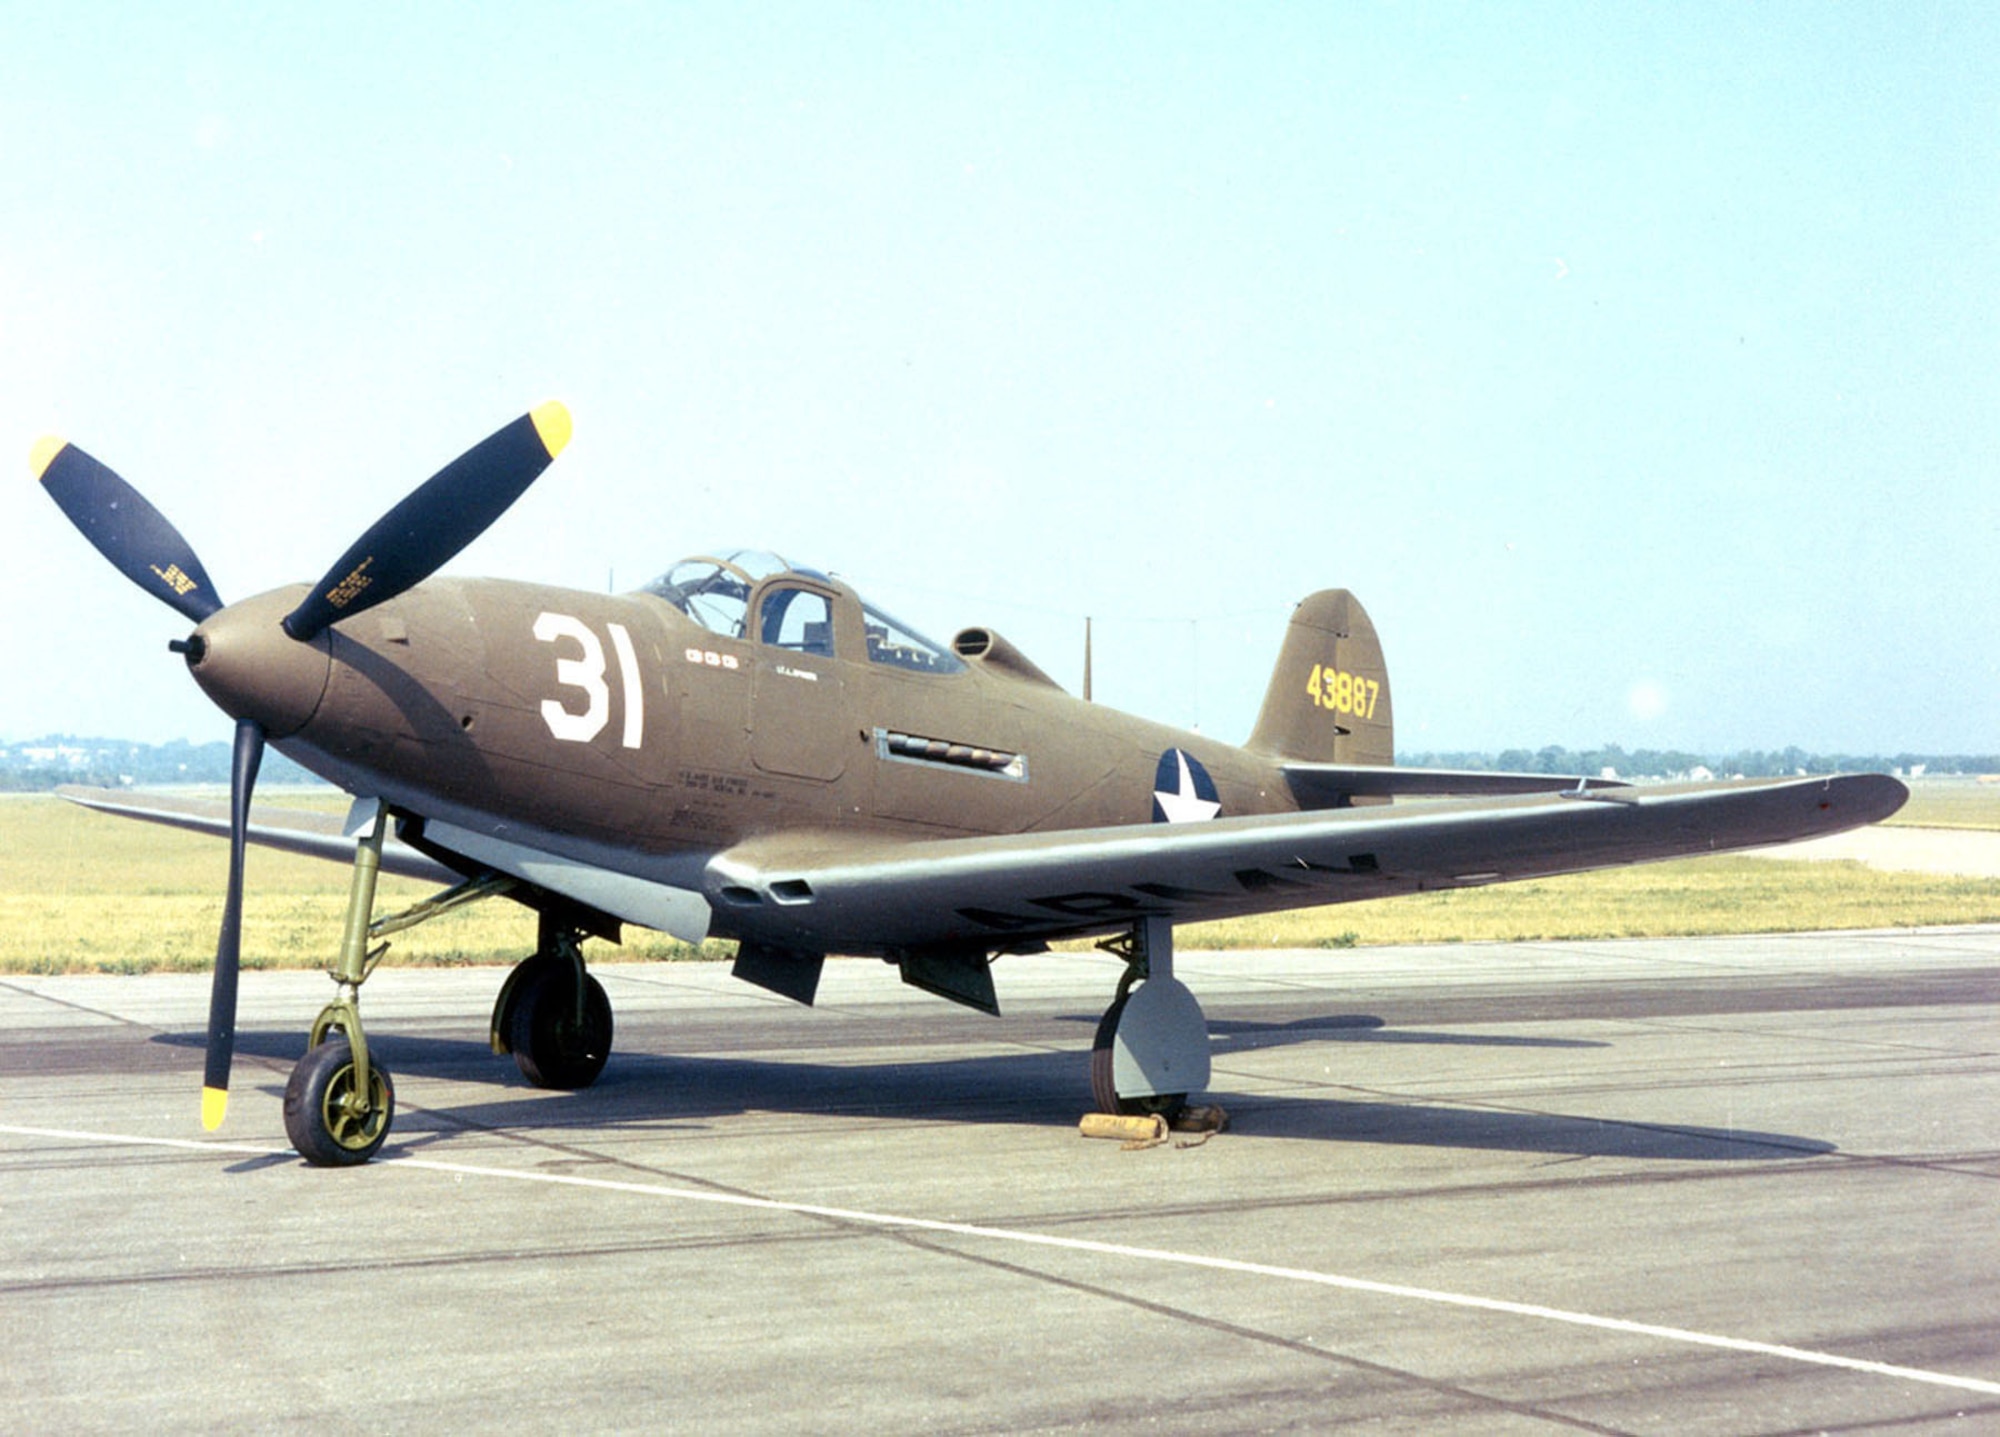 The 26th and 116th Tactical Reconnaissance Squadrons flew the Bell P-39 Airacobra fighter in 1943 during the Oregon Maneuver.  Although the squadrons ultimately were disbanded in November, 1943, and thus did not deploy overseas, the P-39 was used by other tactical reconnaissance squadrons in combat in the Pacific and Mediterranean theaters.  This late-model P-39Q is pictured at the National Museum of the Air Force, Wright-Patterson AFB, Ohio. (U.S. Air Force Photo)